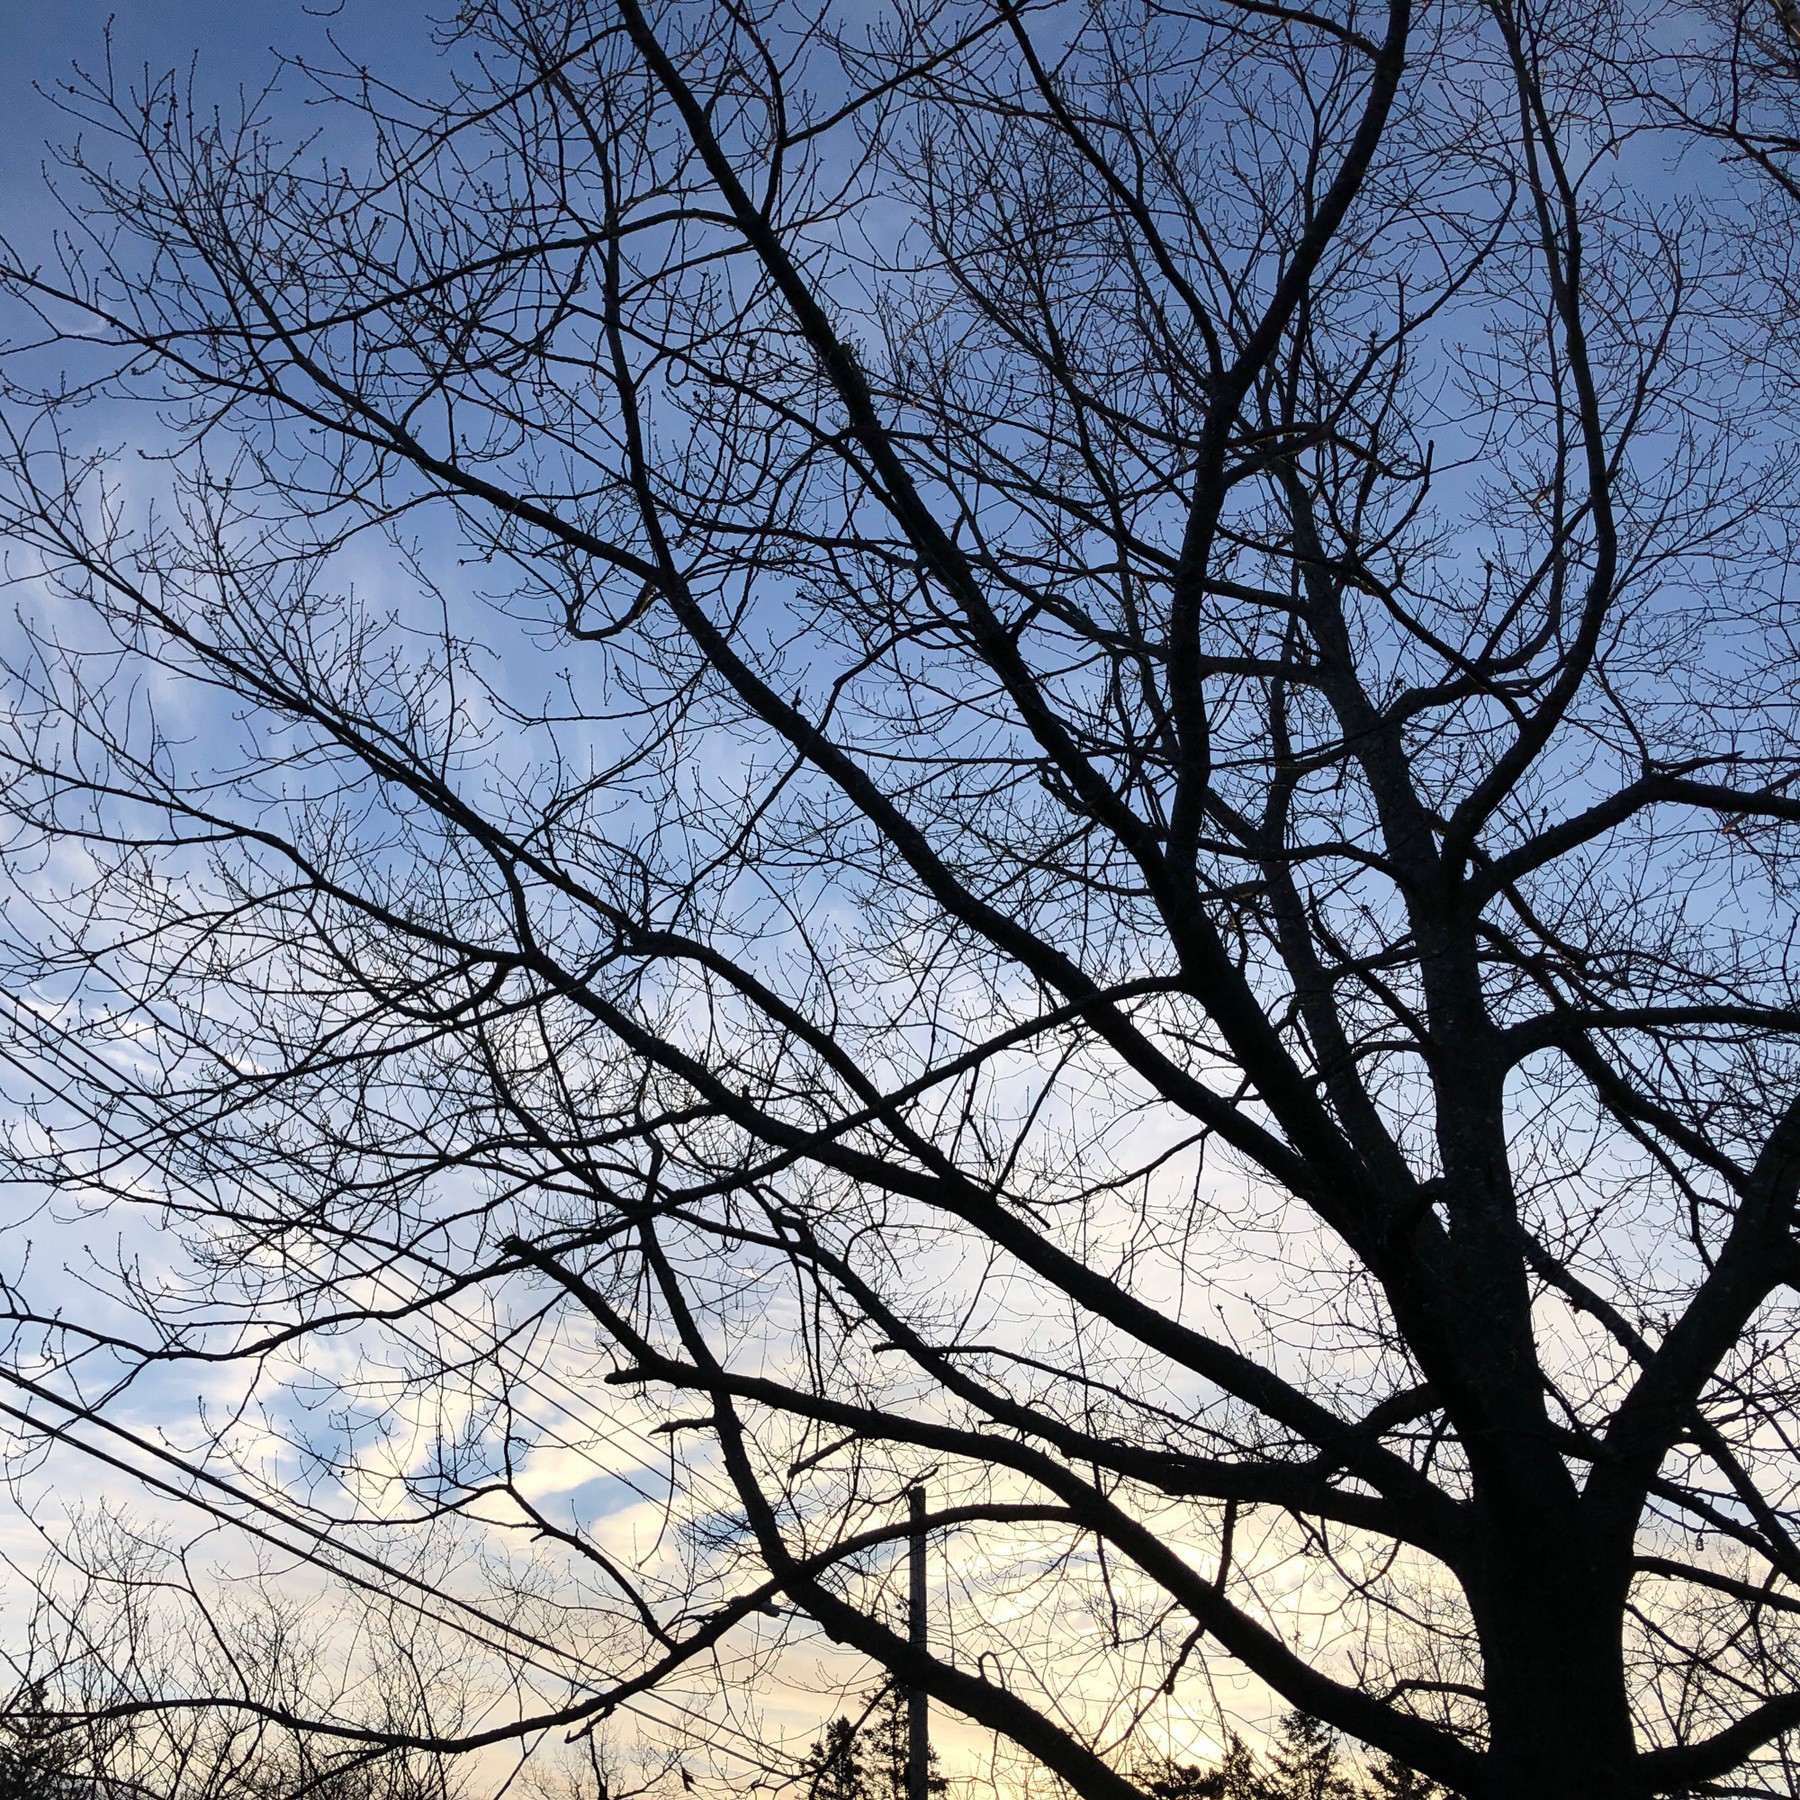 Tree branches and sky.